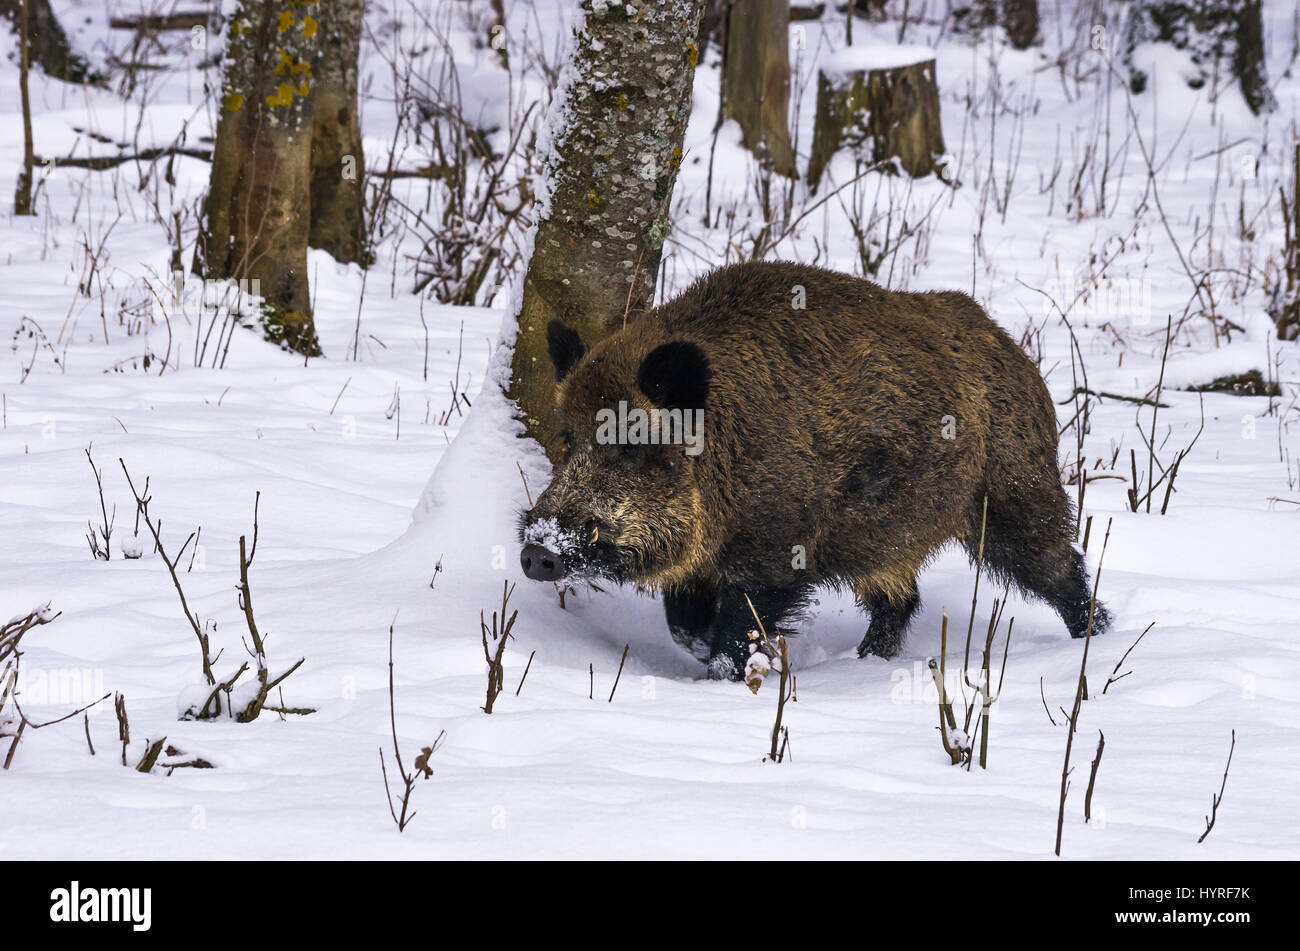 Wild pig) in a snowy wintery forest. Stock Photo